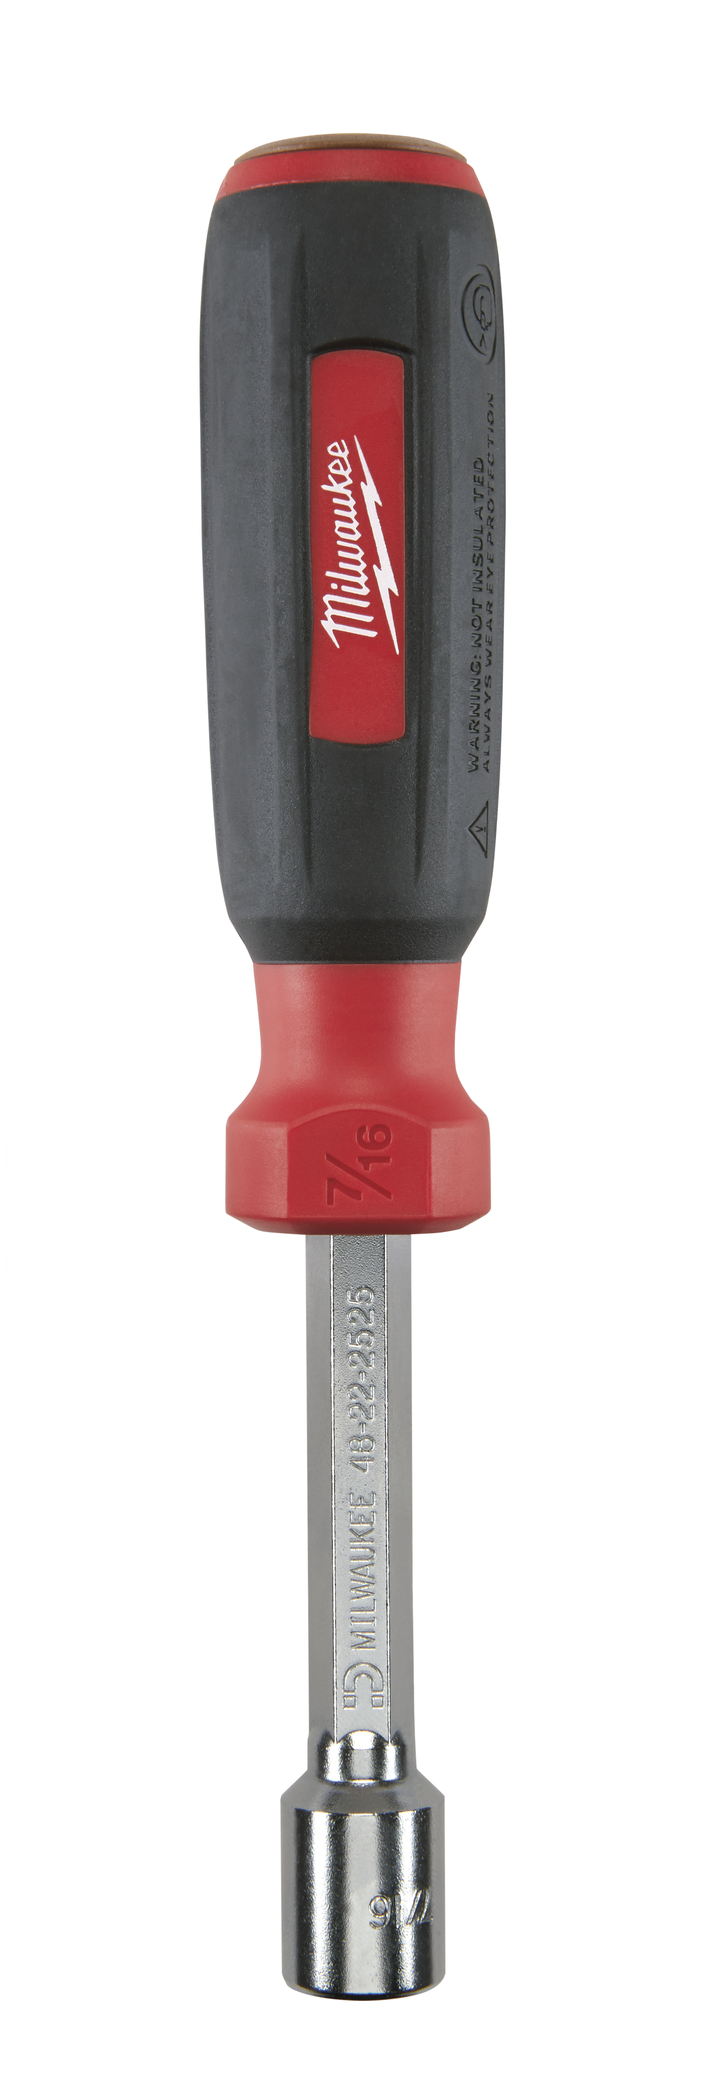 7/16 in. HollowCore Magnetic Nut Driver